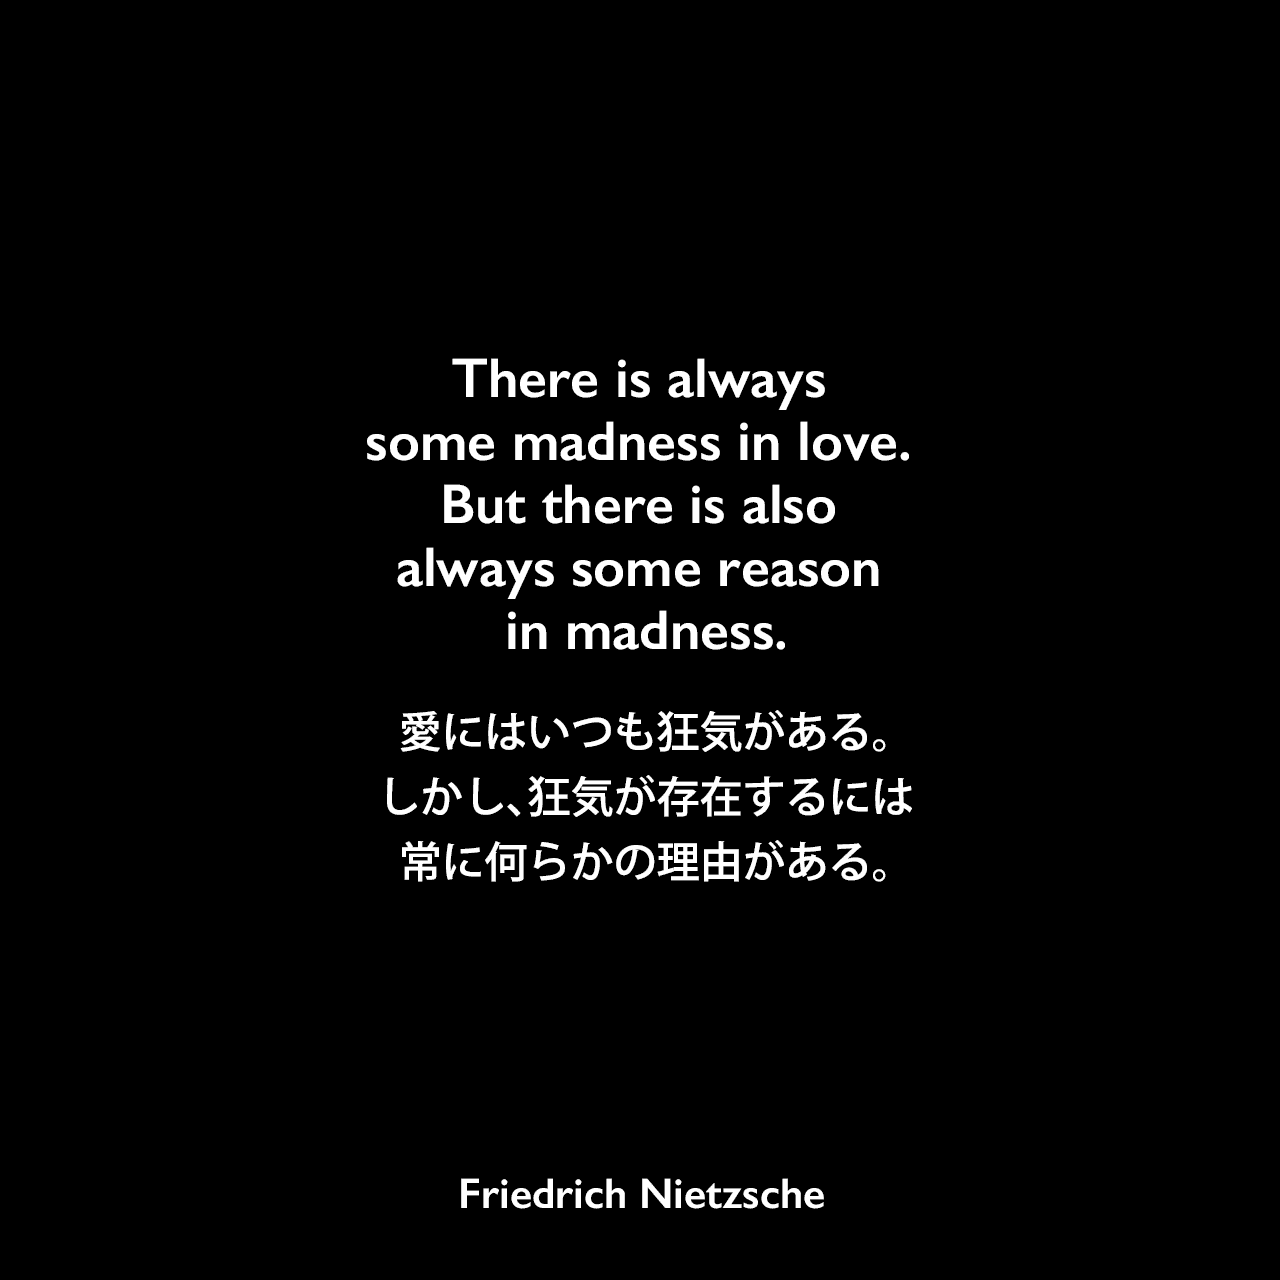 There is always some madness in love. But there is also always some reason in madness.愛にはいつも狂気がある。 しかし、狂気が存在するには常に何らかの理由がある。Friedrich Nietzsche